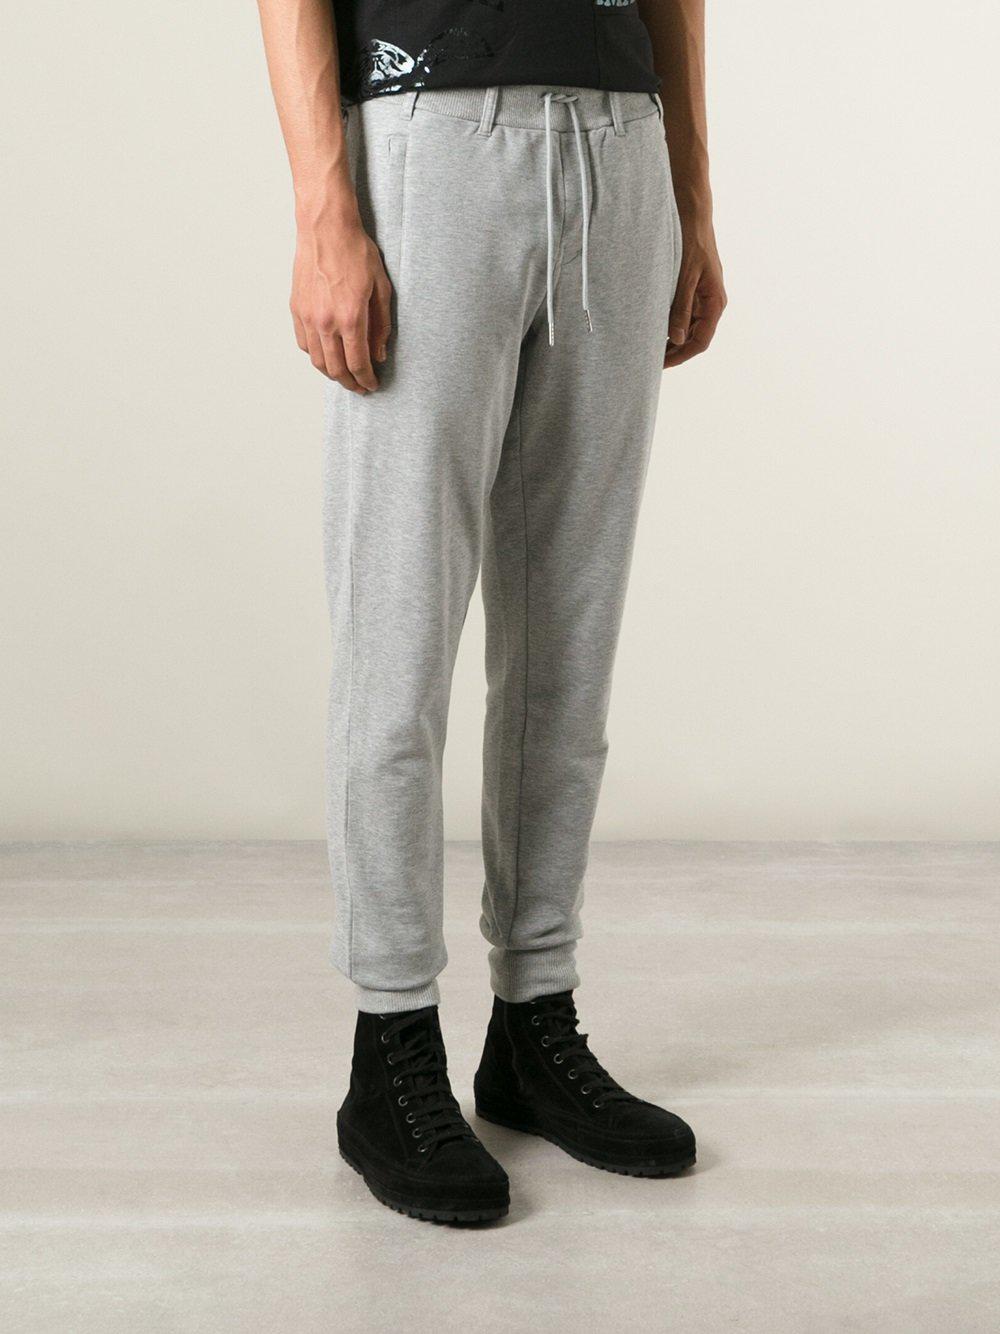 Y-3 Cotton Waistband With Belt Loops Track Trousers in Grey (Gray 